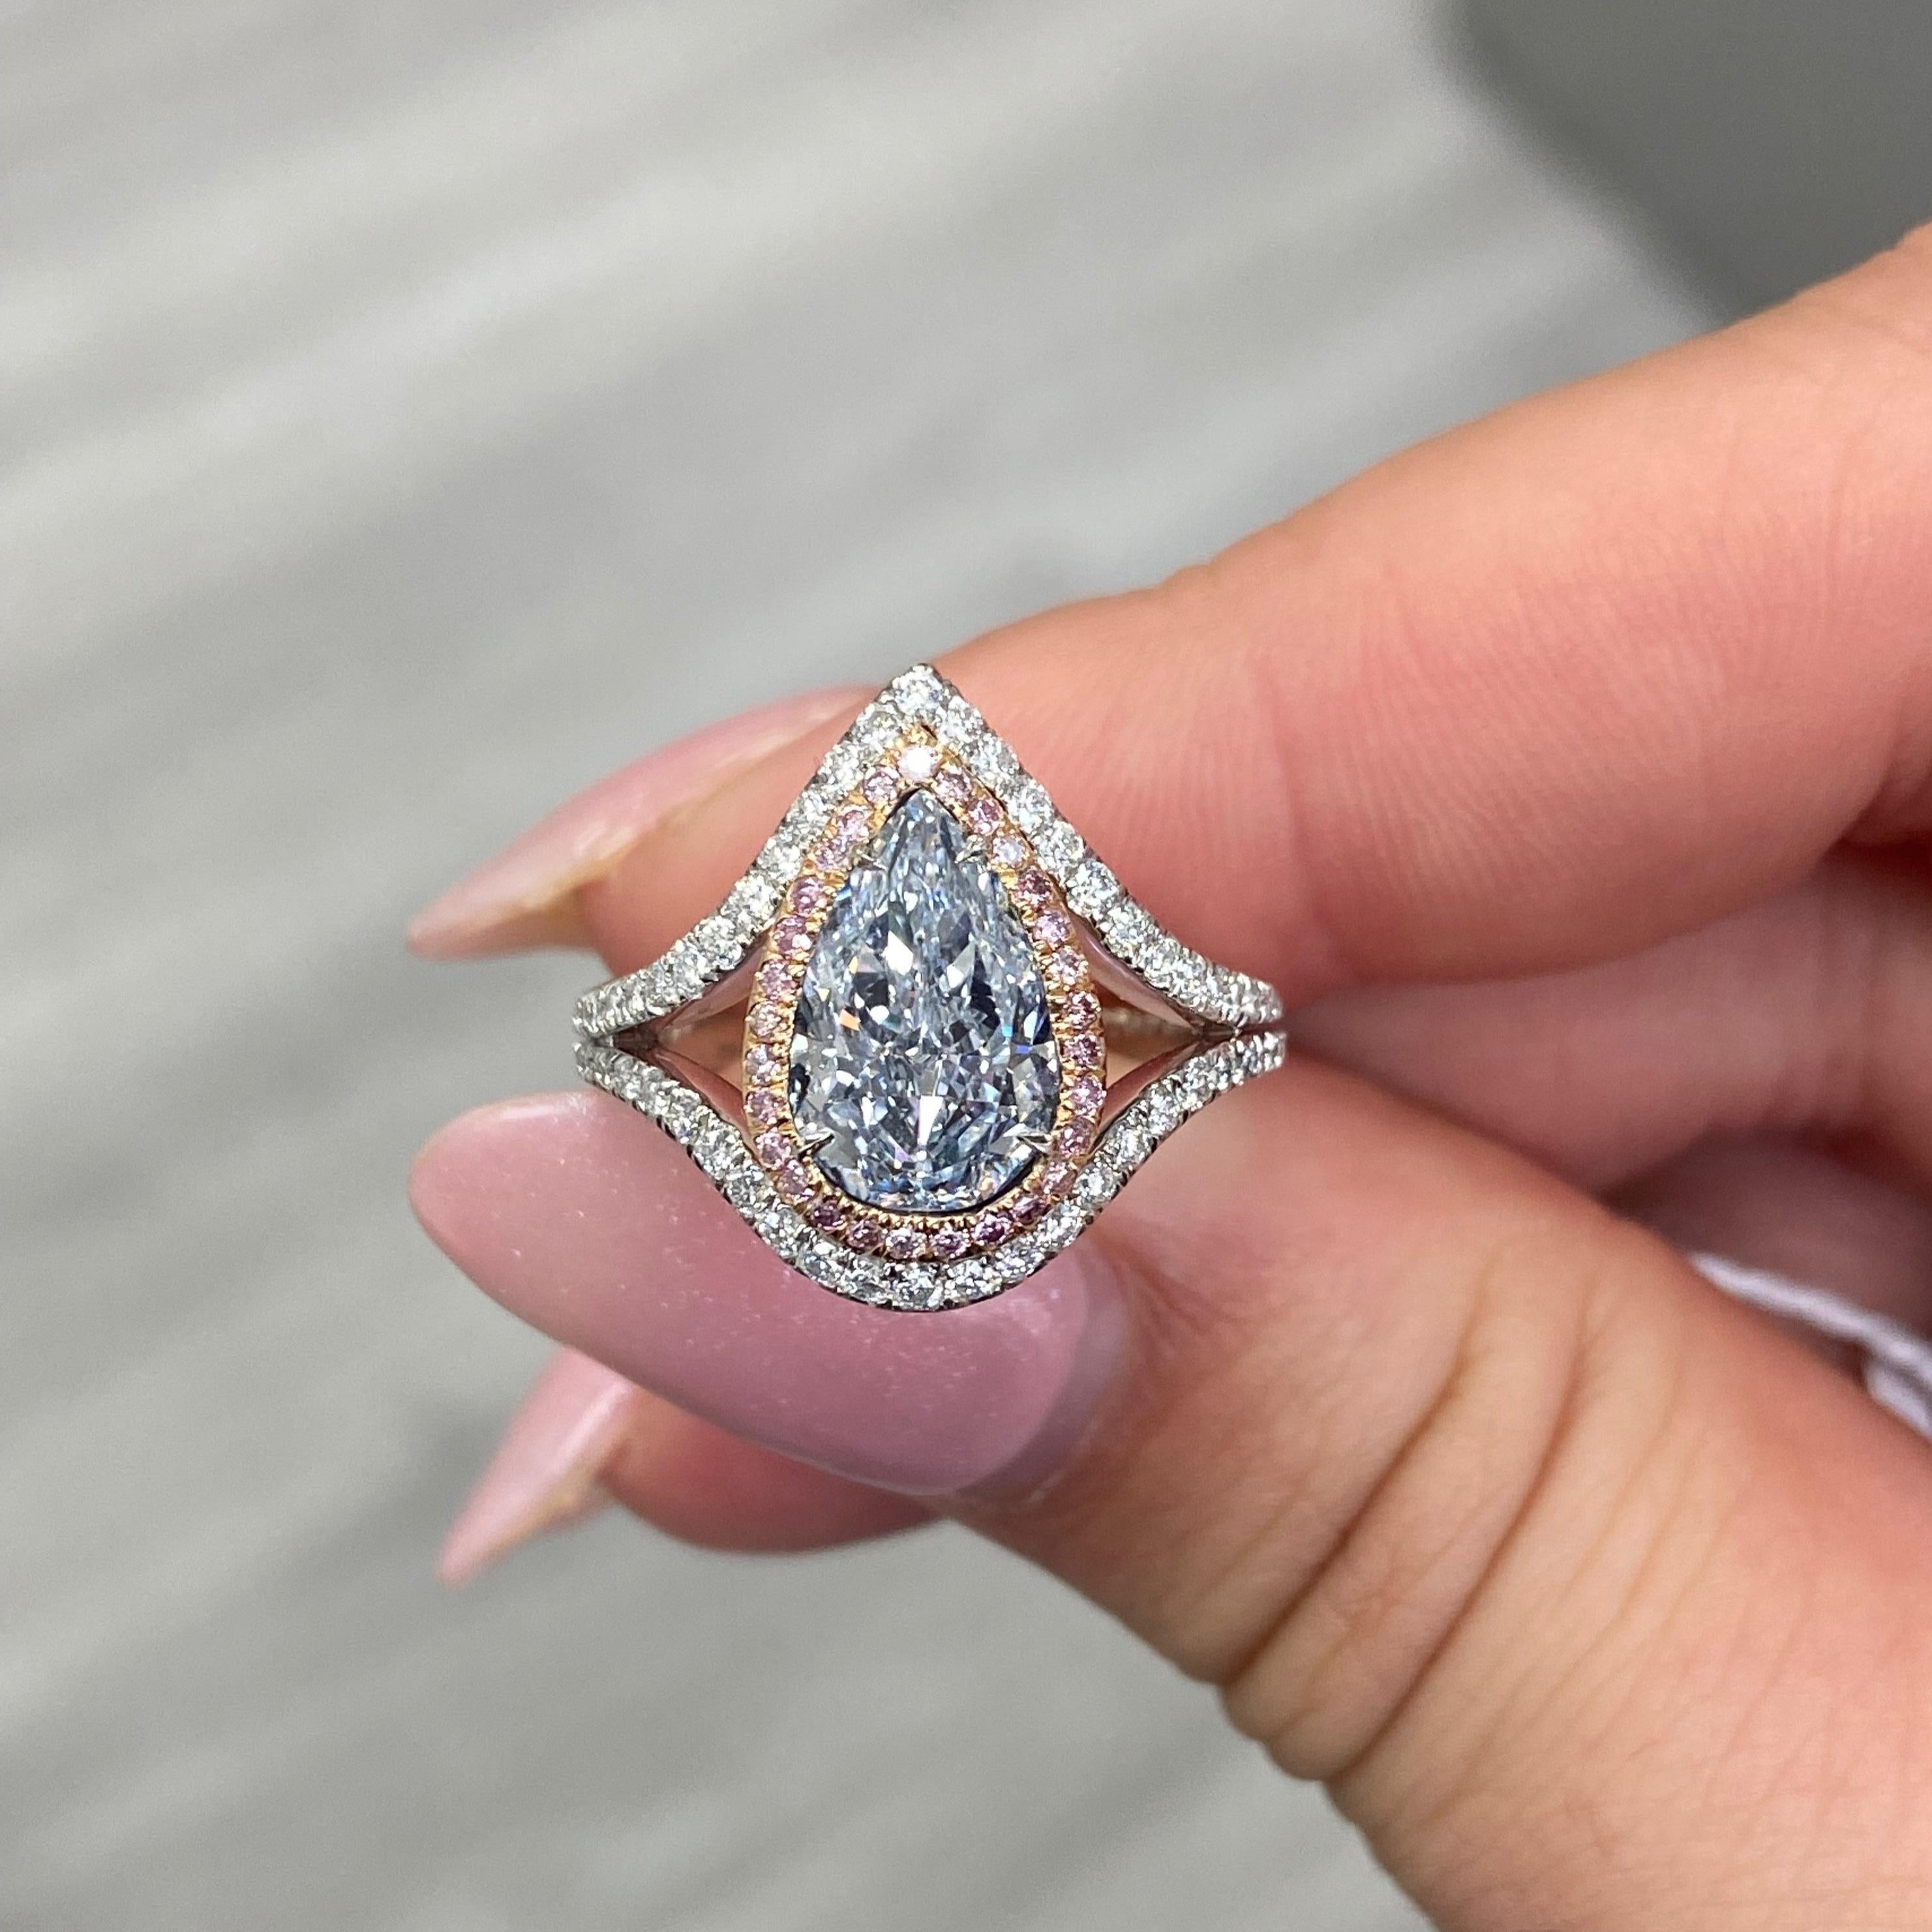 - Exceptionally gorgeous 2.13ct GIA Very Light Blue Pear shape white gorgeous color and a beautiful pear model 1.59 ratio
- Set in Platinum and Rose Gold with 0.96ct of pink and white diamonds
 2.13 carat center blue diamond
Very Light Blue
Pear